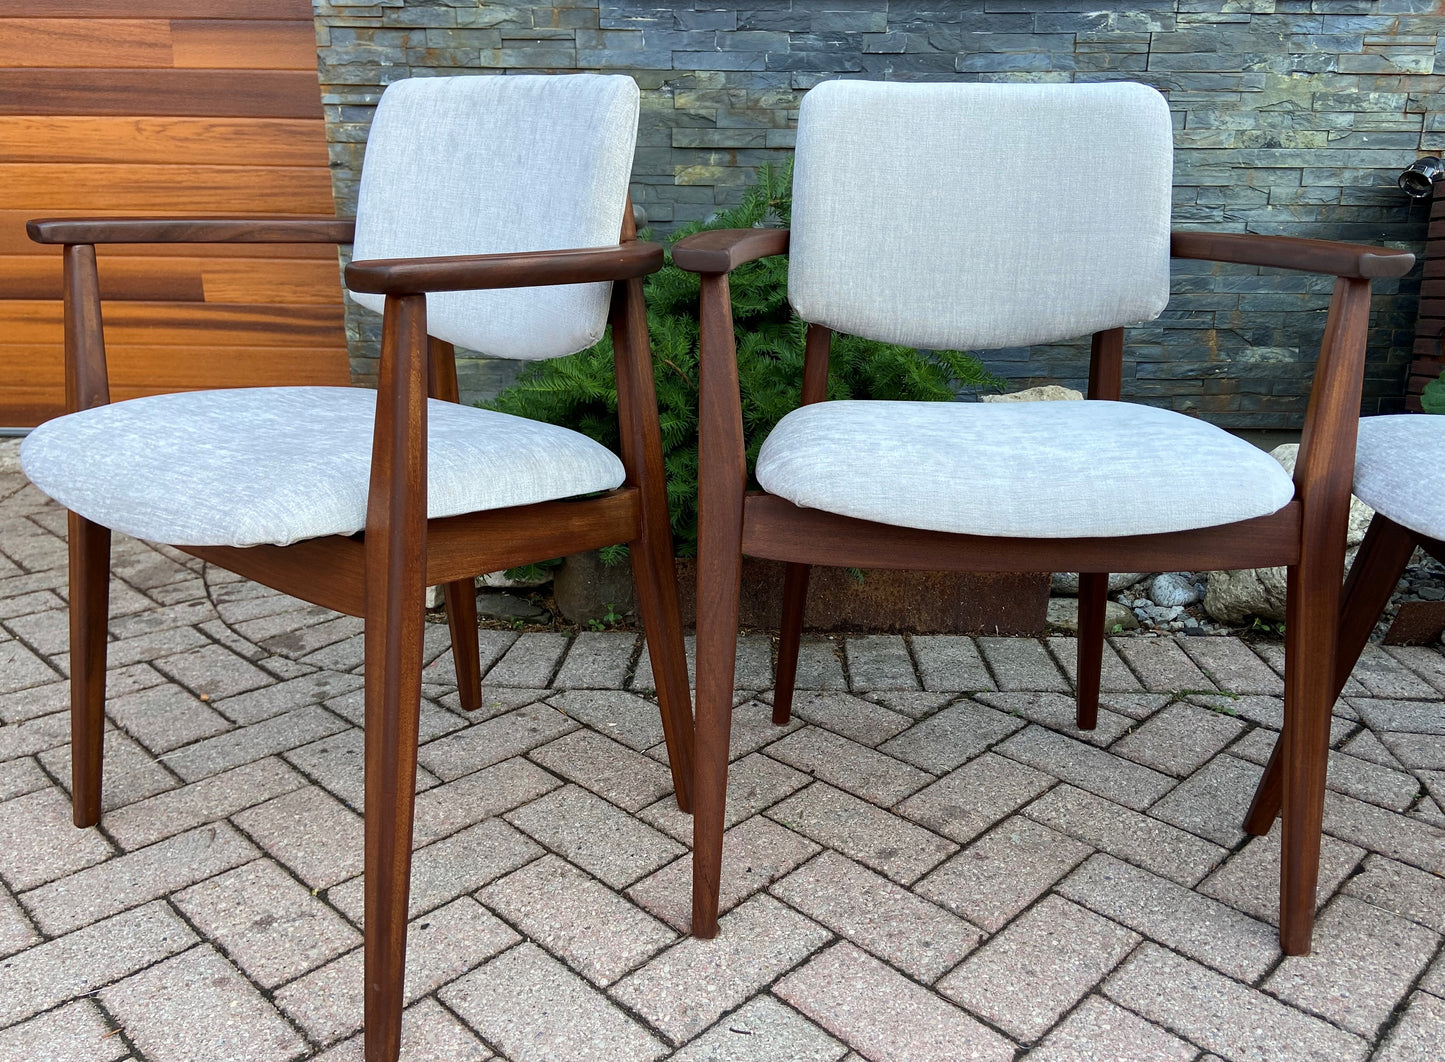 6 REFINISHED REUPHOLSTERED Mid Century Modern Solid Teak Chairs by Jan Kuypers, PERFECT